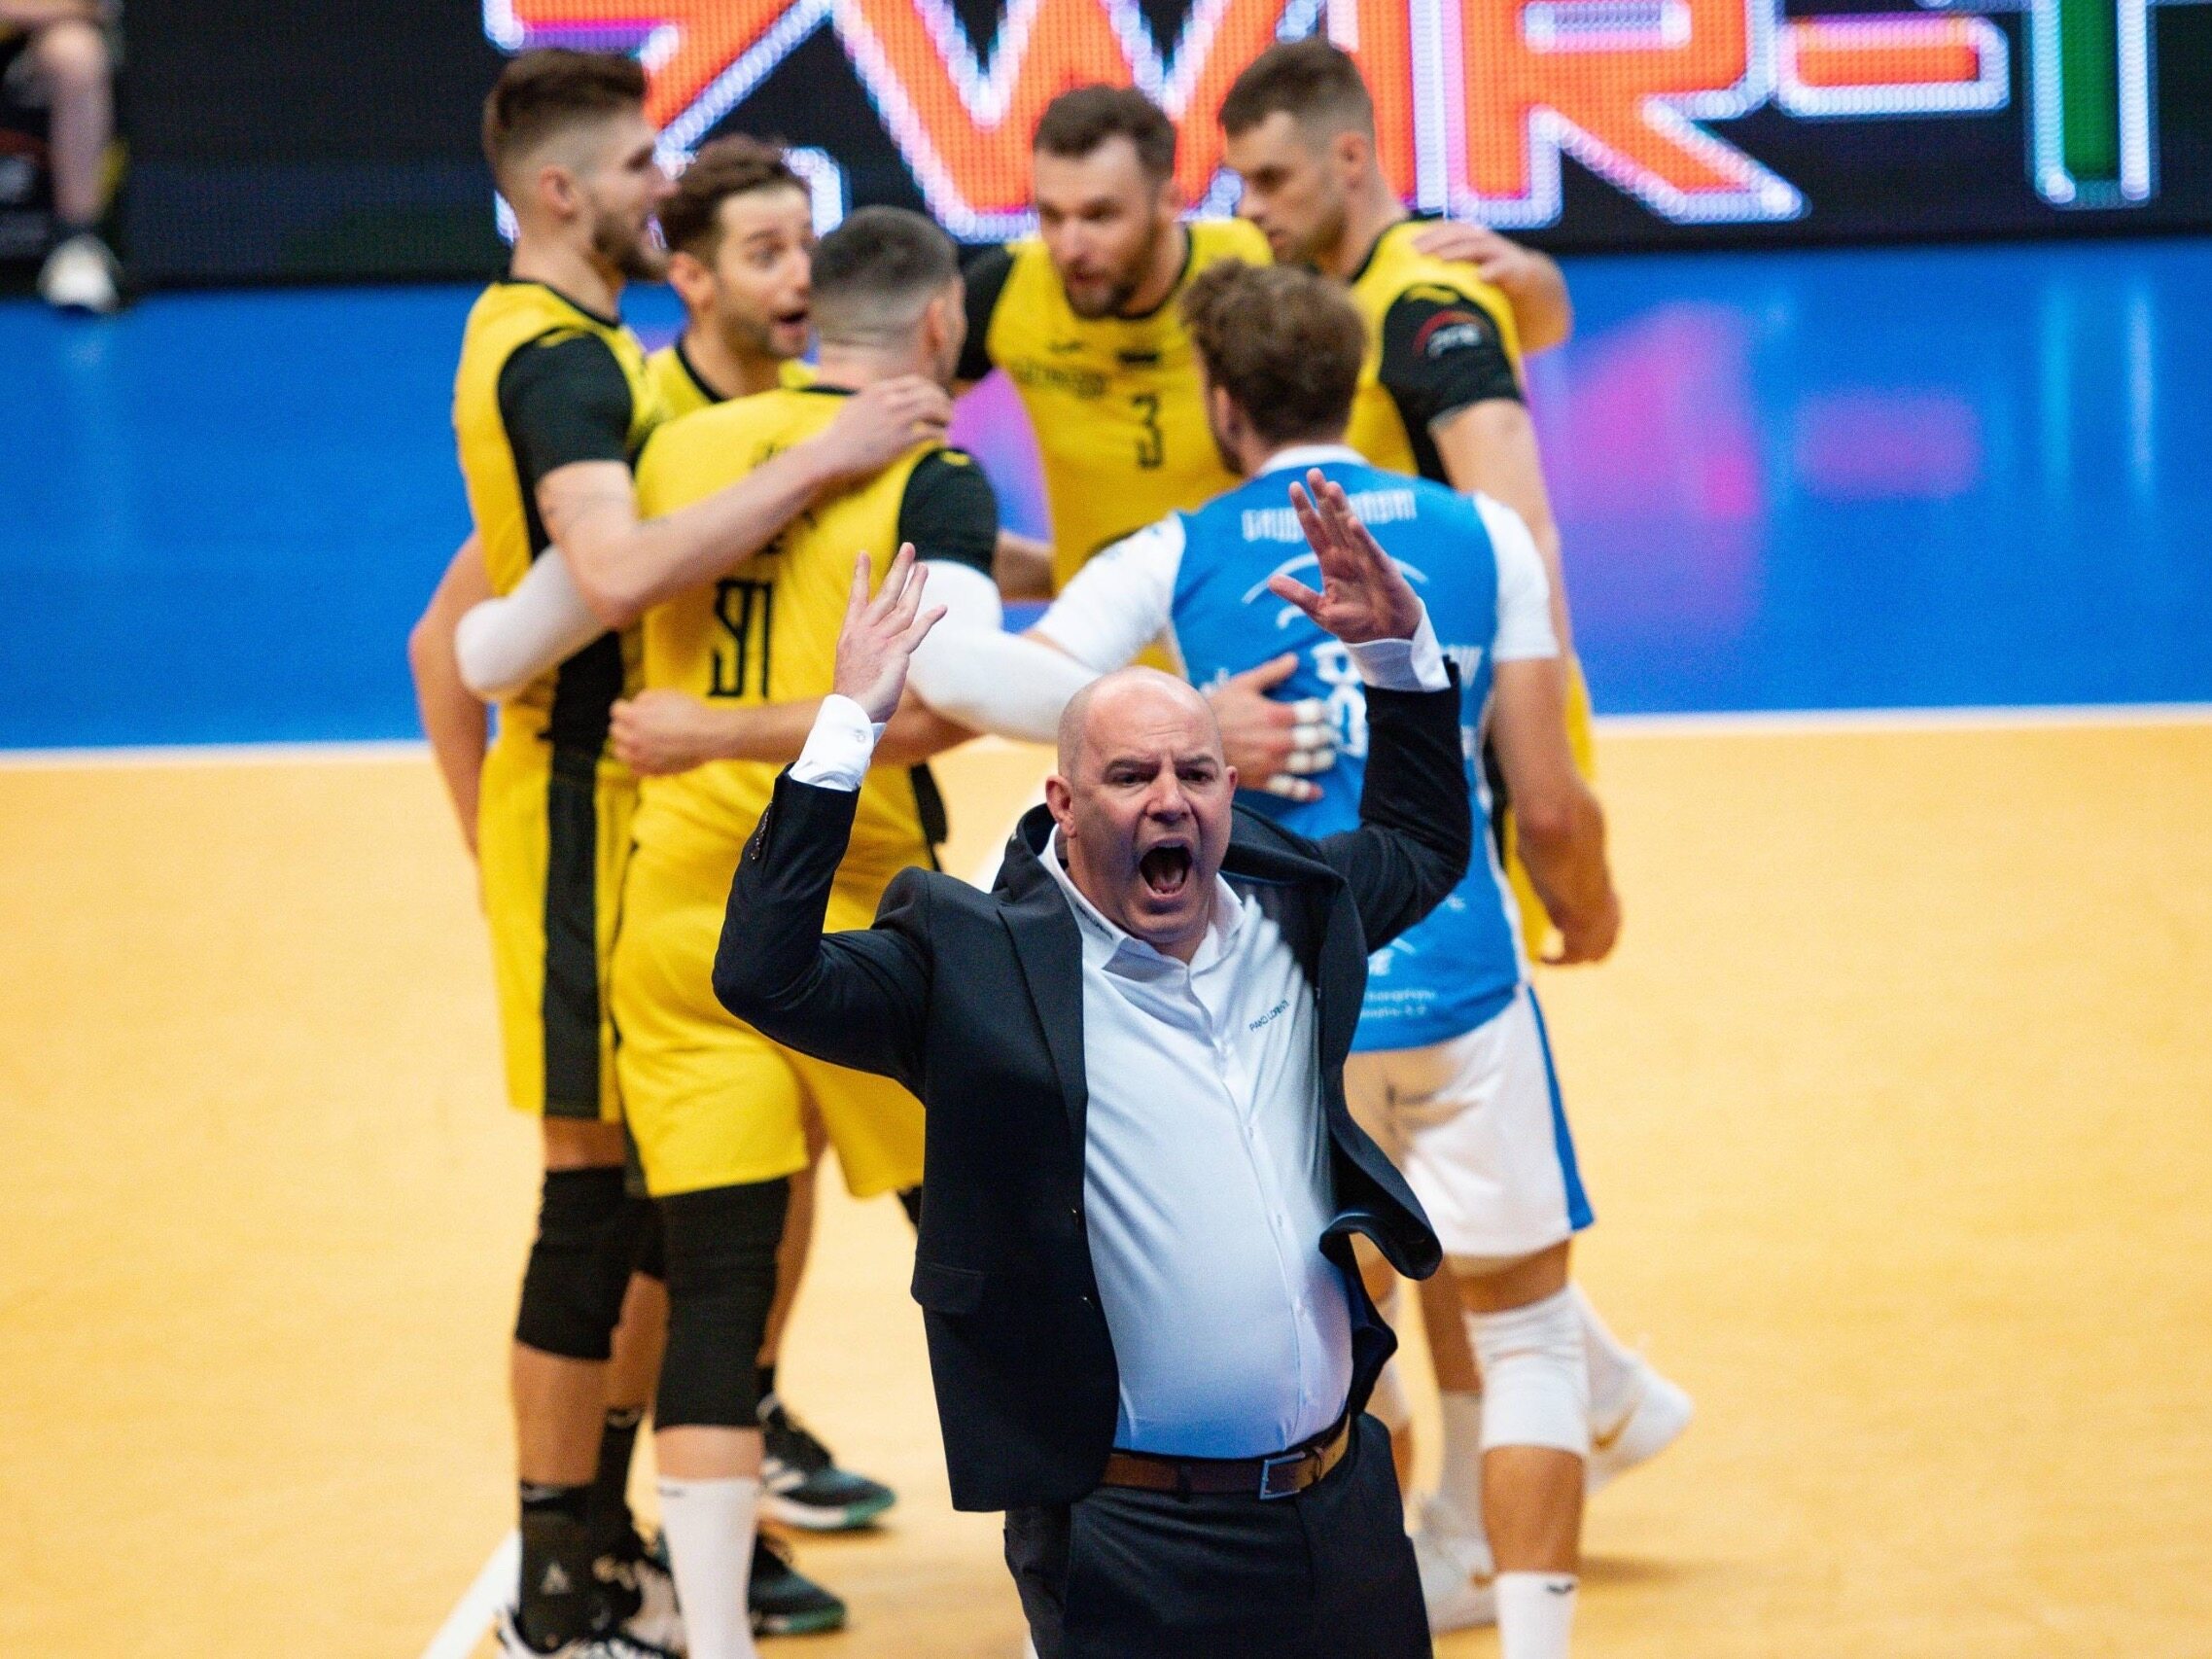 Complete chaos in the PlusLiga club.  The former coach's words say it all